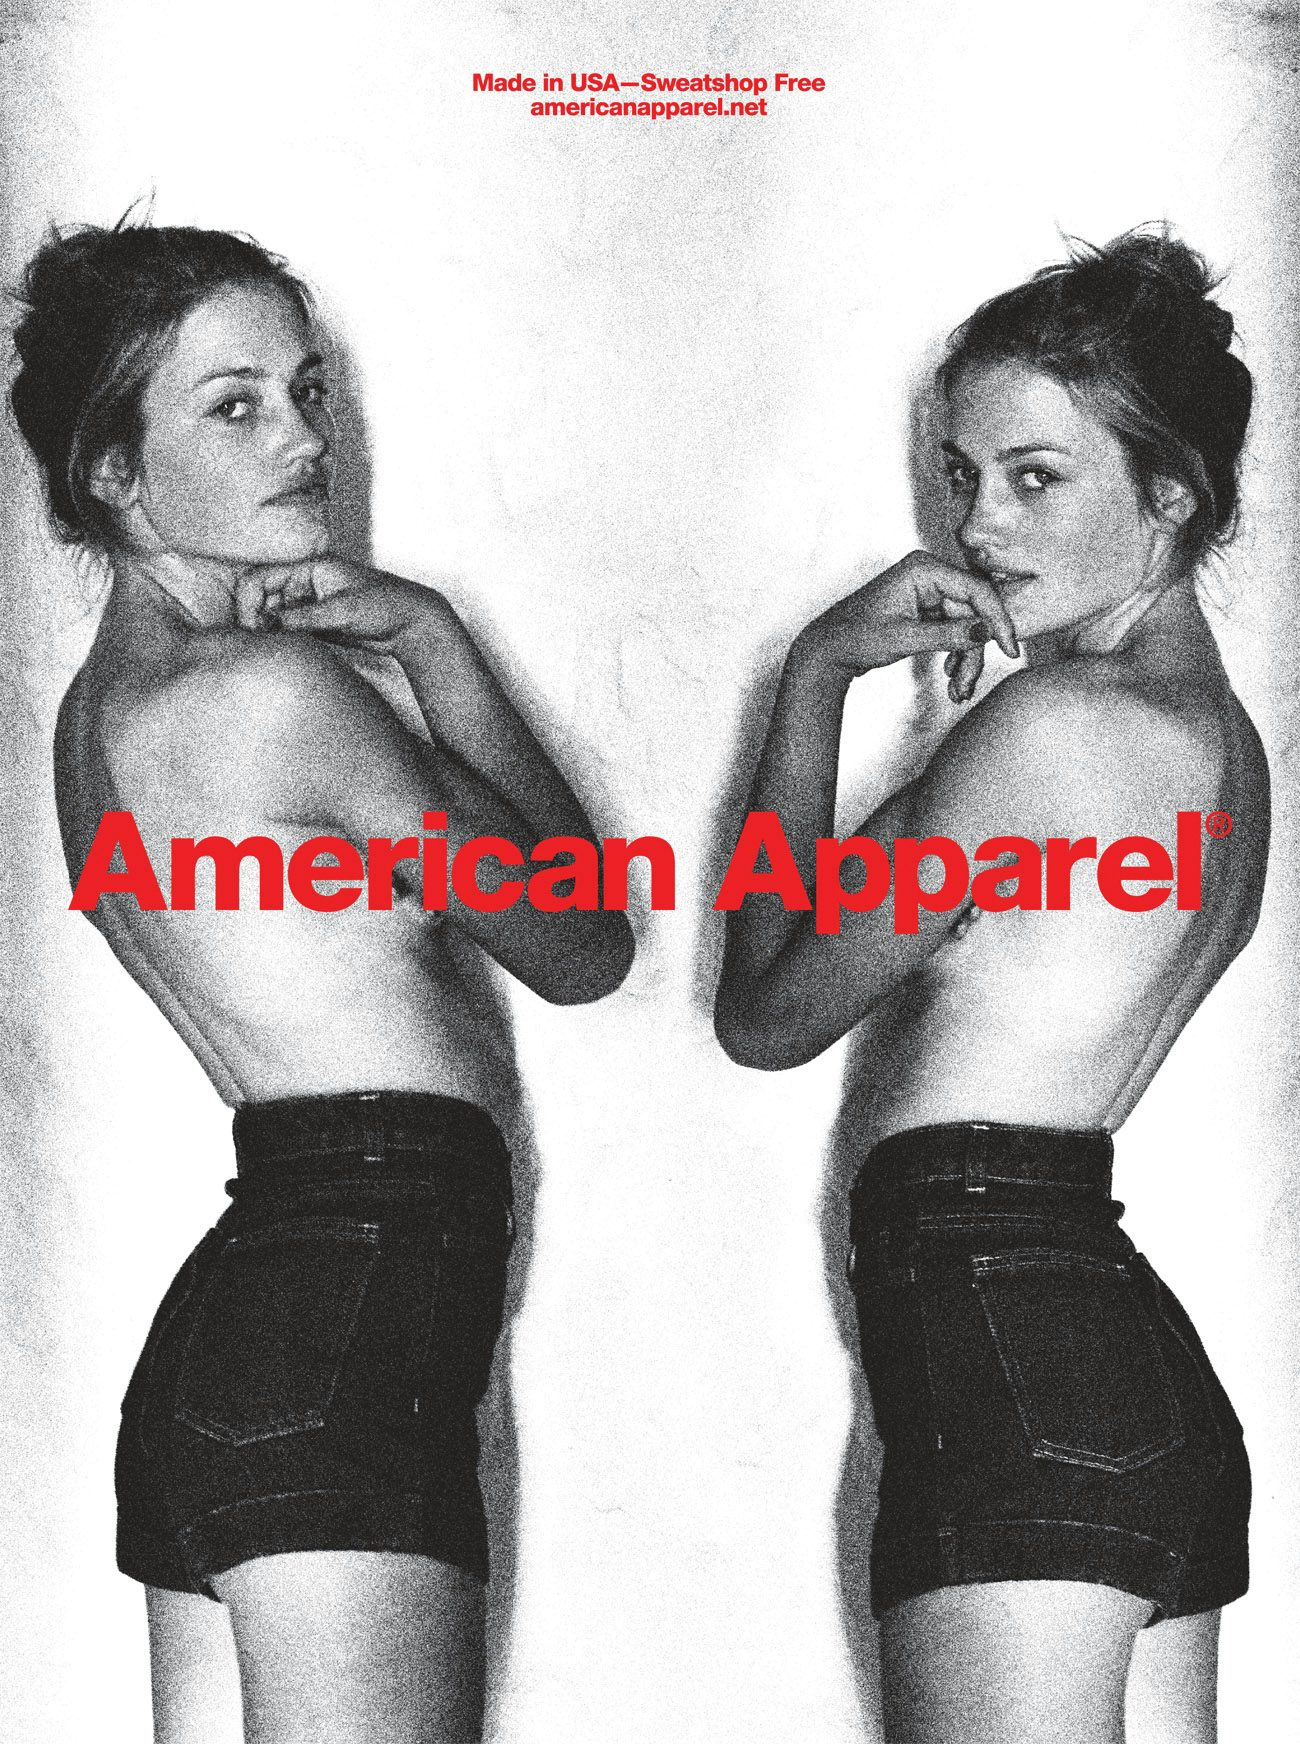 American Apparel uses 'non-models'